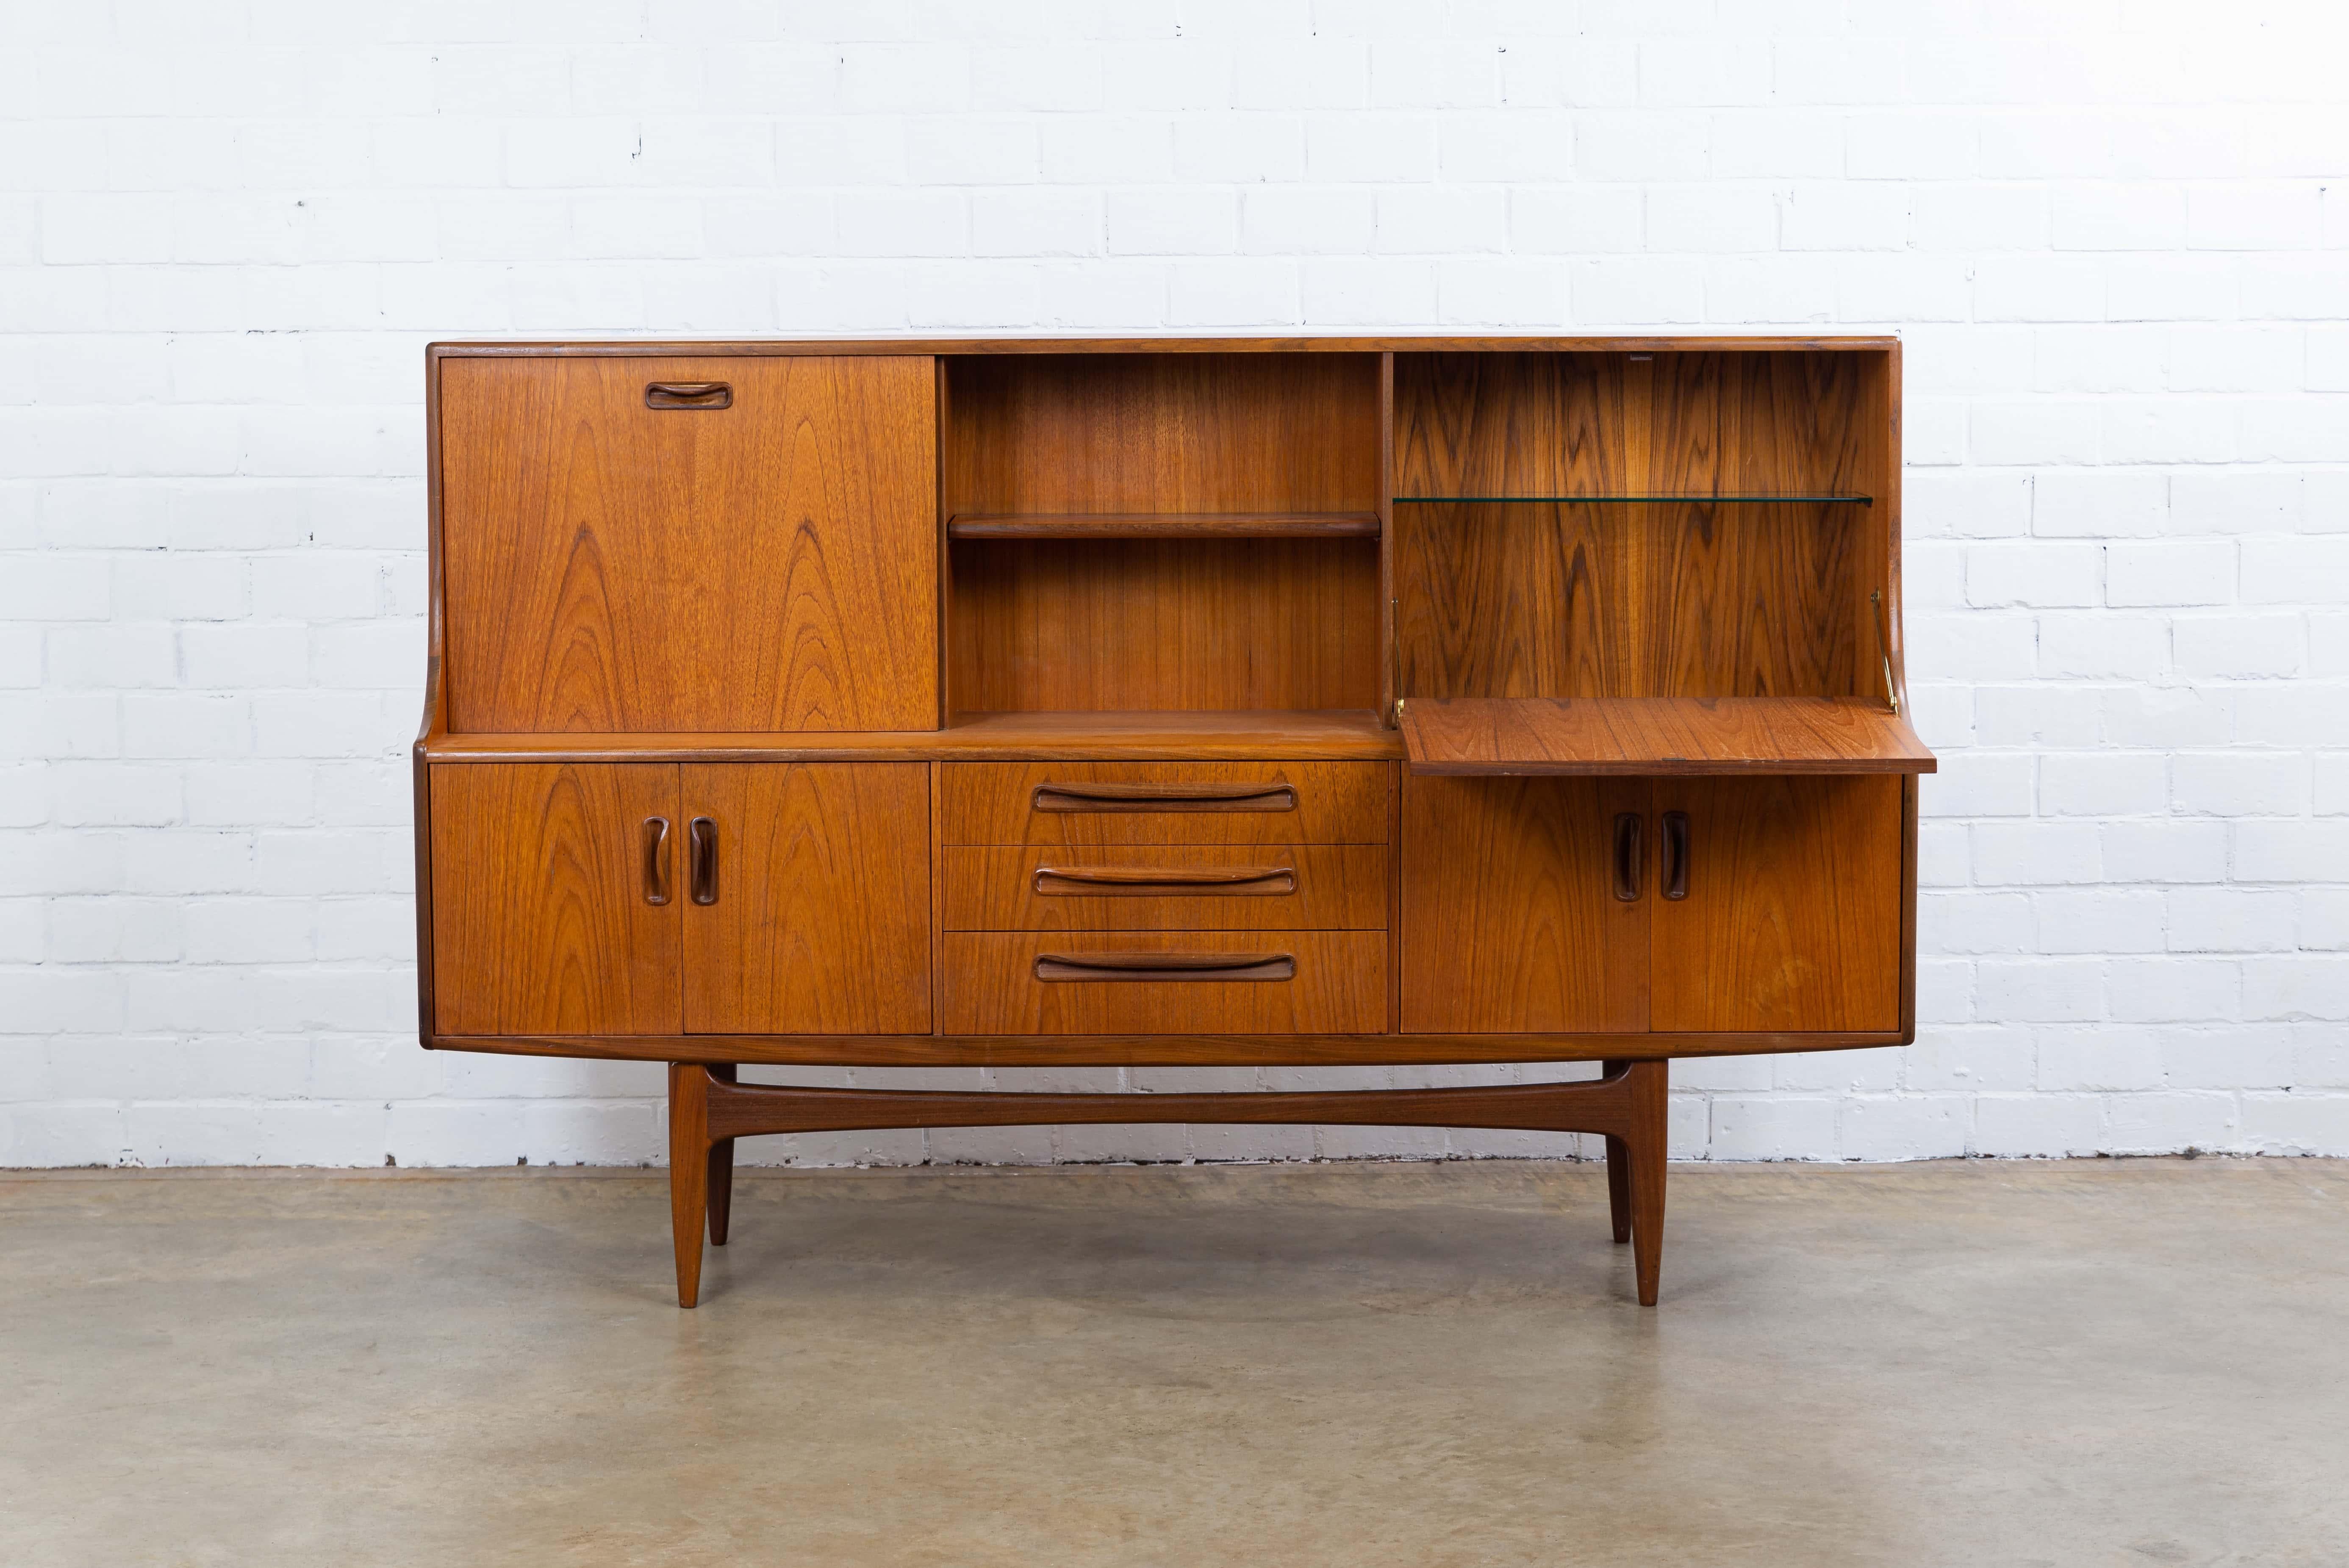 Beautiful bar cabinet finished in teak.
Produced by G Plan (UK), designed by Victor Bramwell Wilkins.